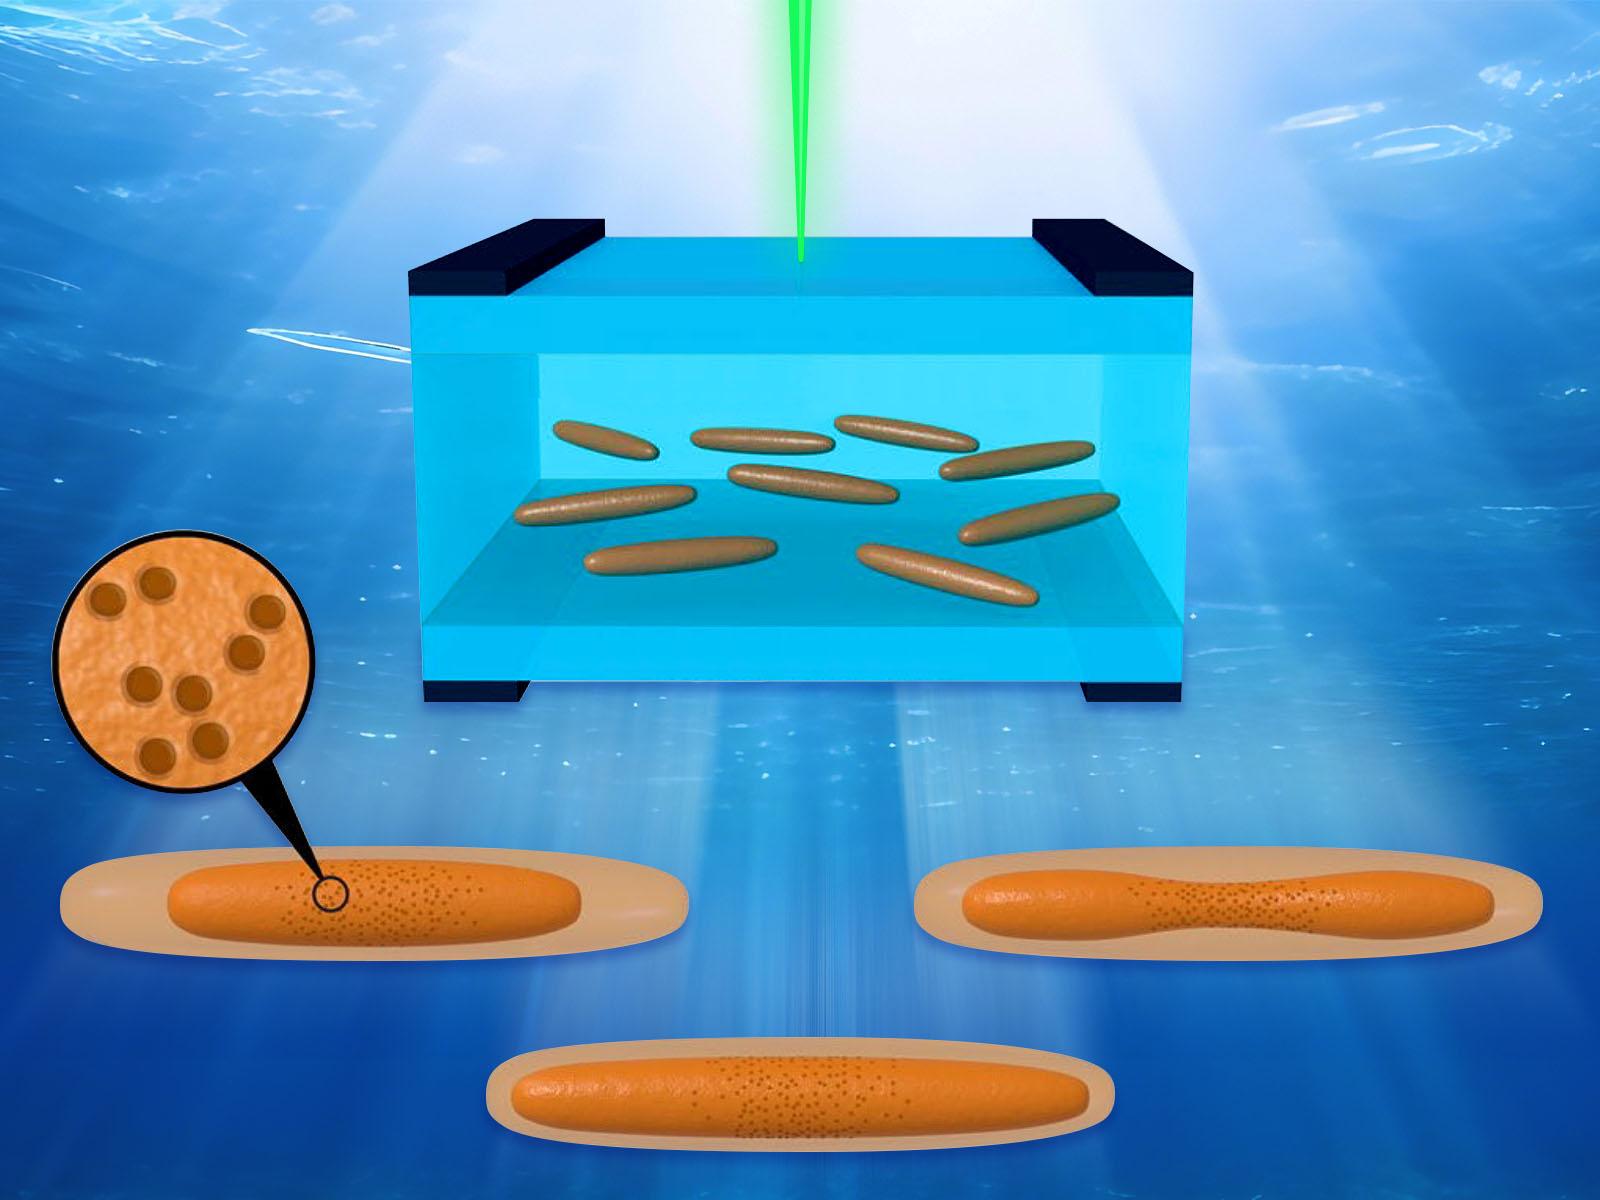 Illustration showing akaganeite nanorods dissolving differently under different conditions